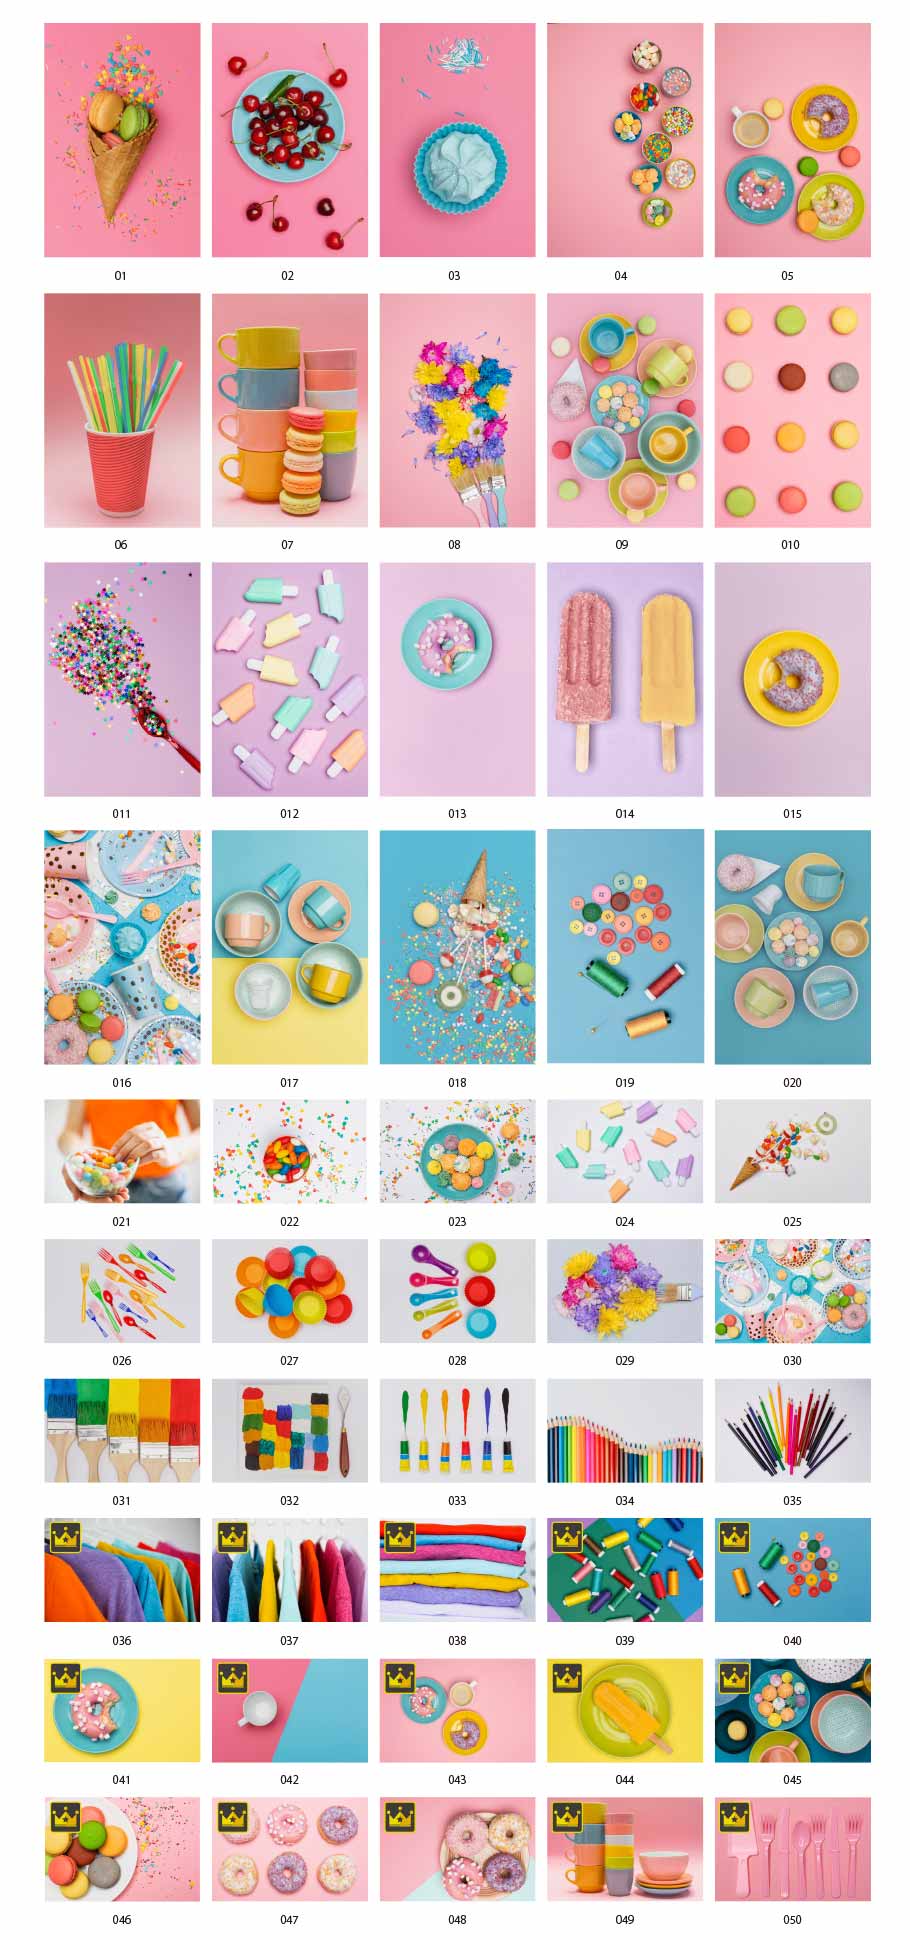 Colorful product photos